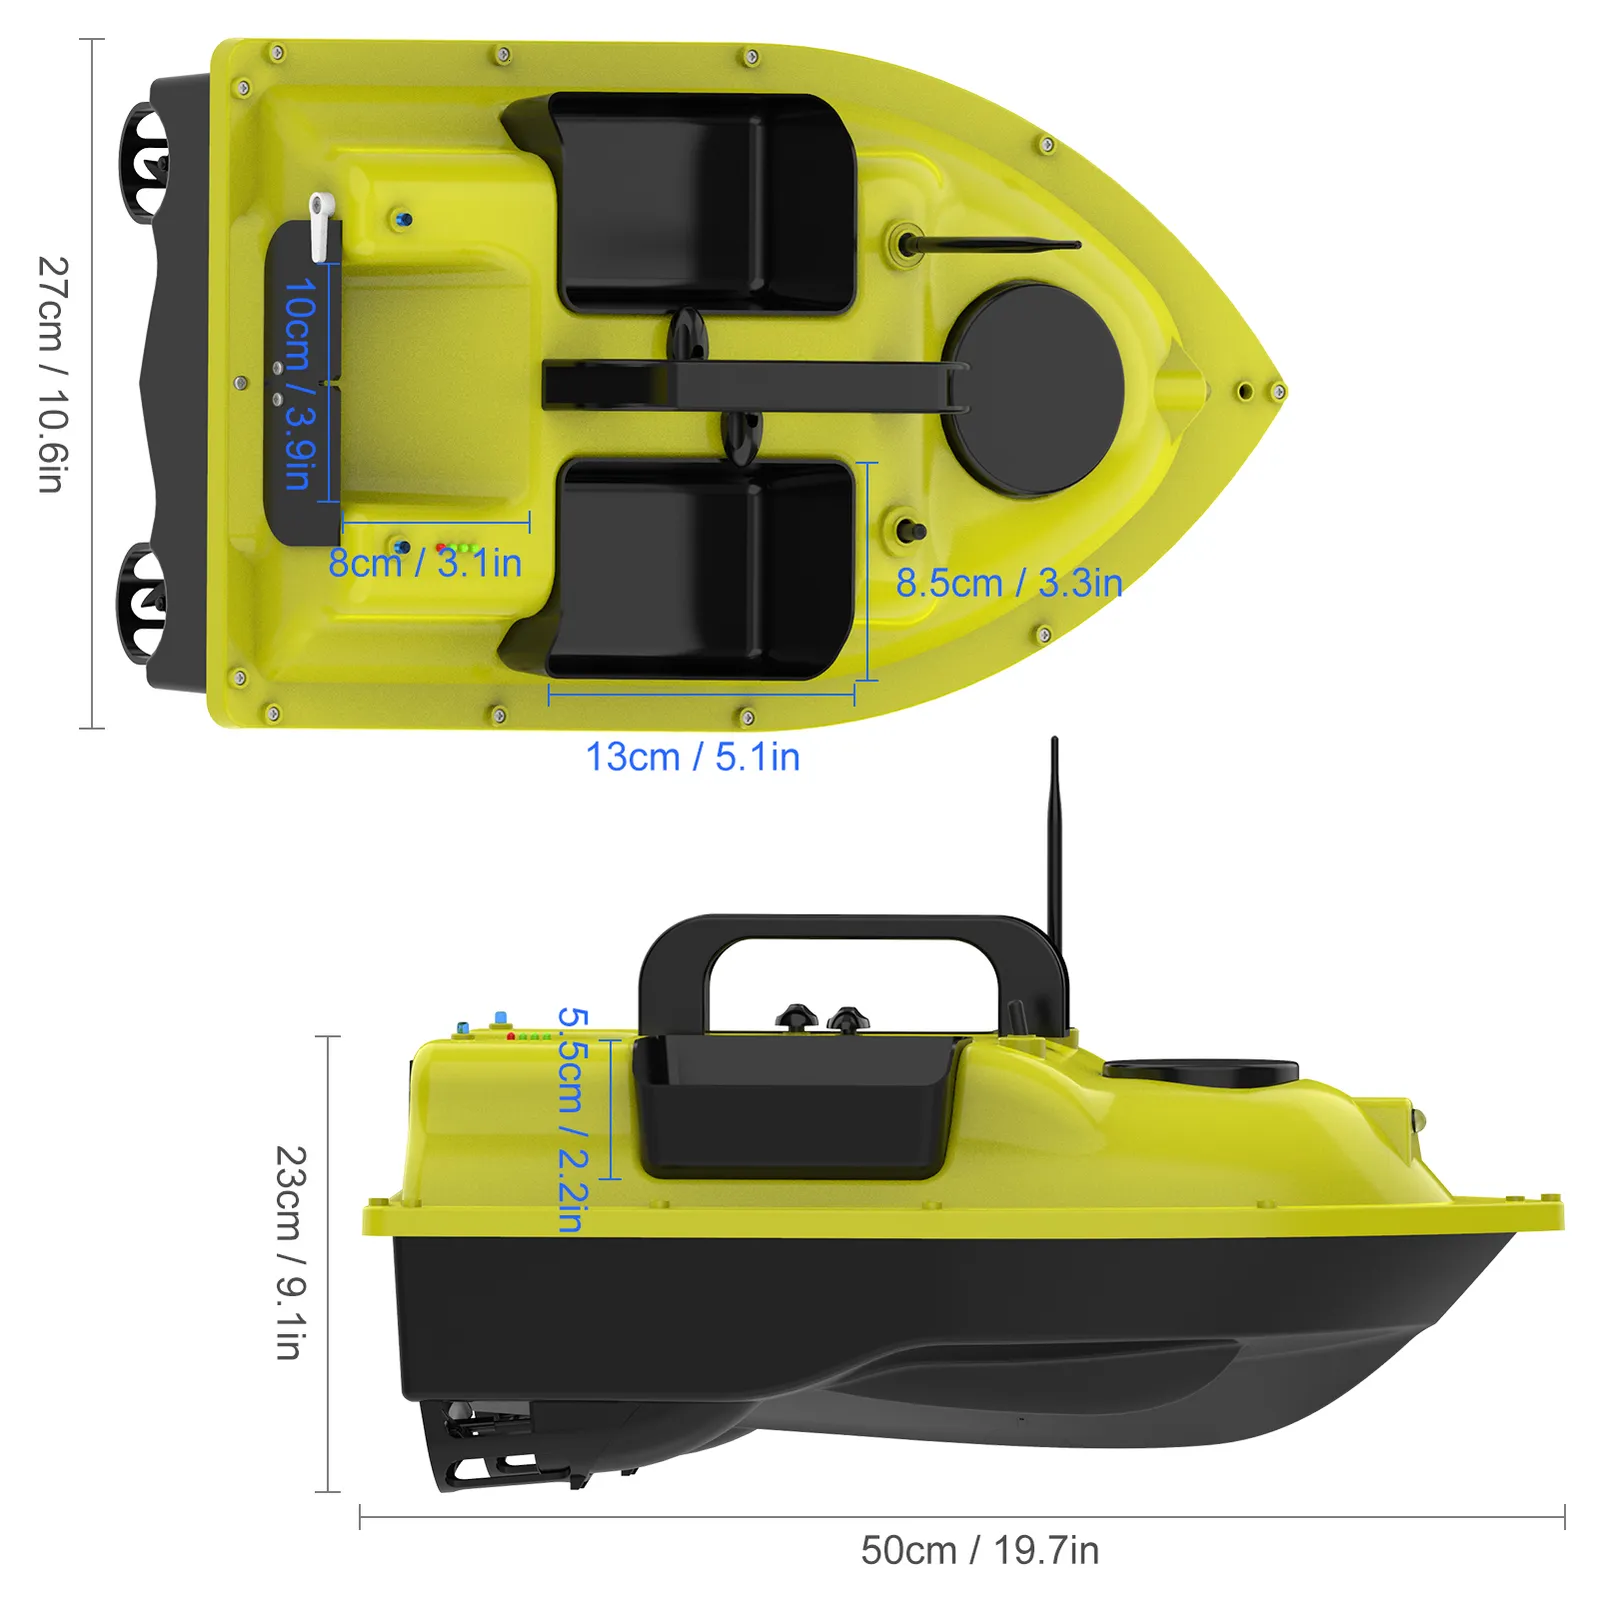 GPS Fishing Remote Control Boat With 3 Containers, Automatic Fixed Speed  Cruise, Remote Control Finder, And 400 500M Range 230609 From Ren05,  $104.52